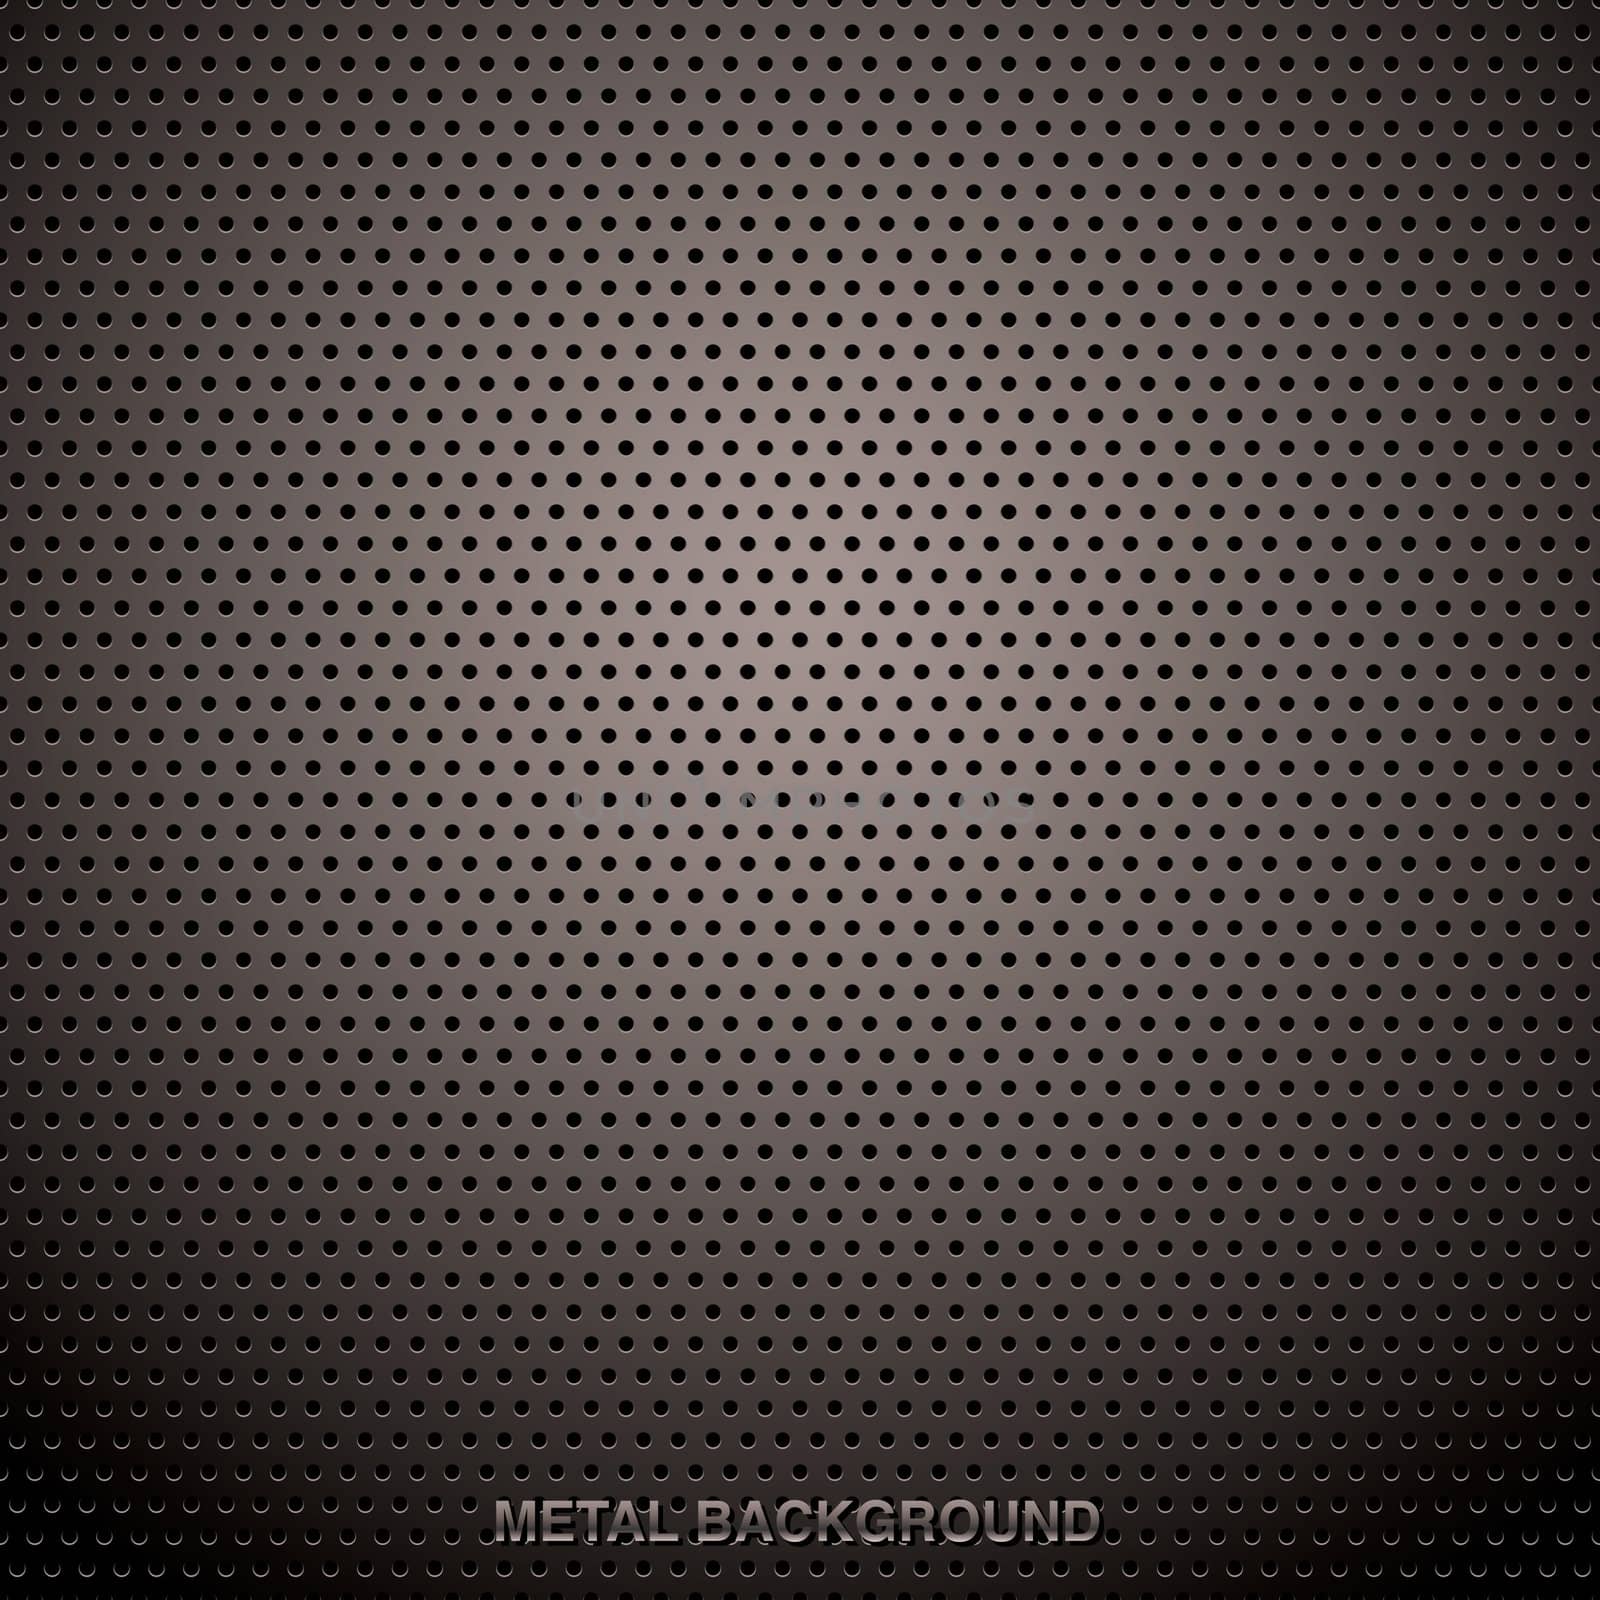 Abstract metal grill background with holes and ideal web page backdrop